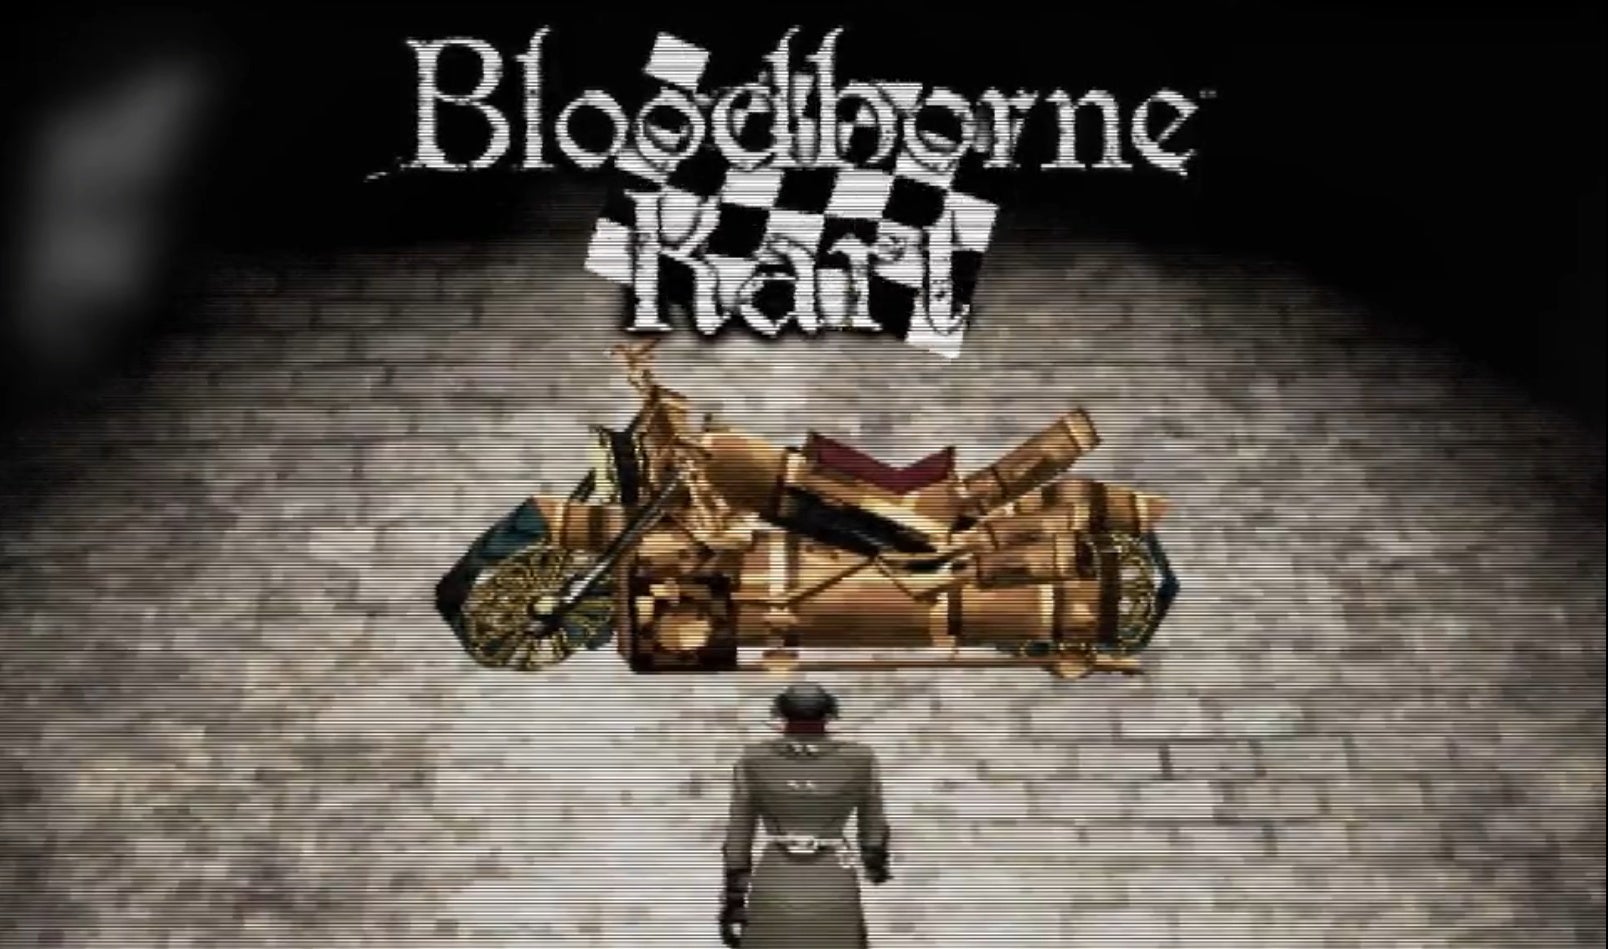 An image from the Bloodborne Kart trailer showing the protagonist walking towards their bike, posed like the Akira poster.